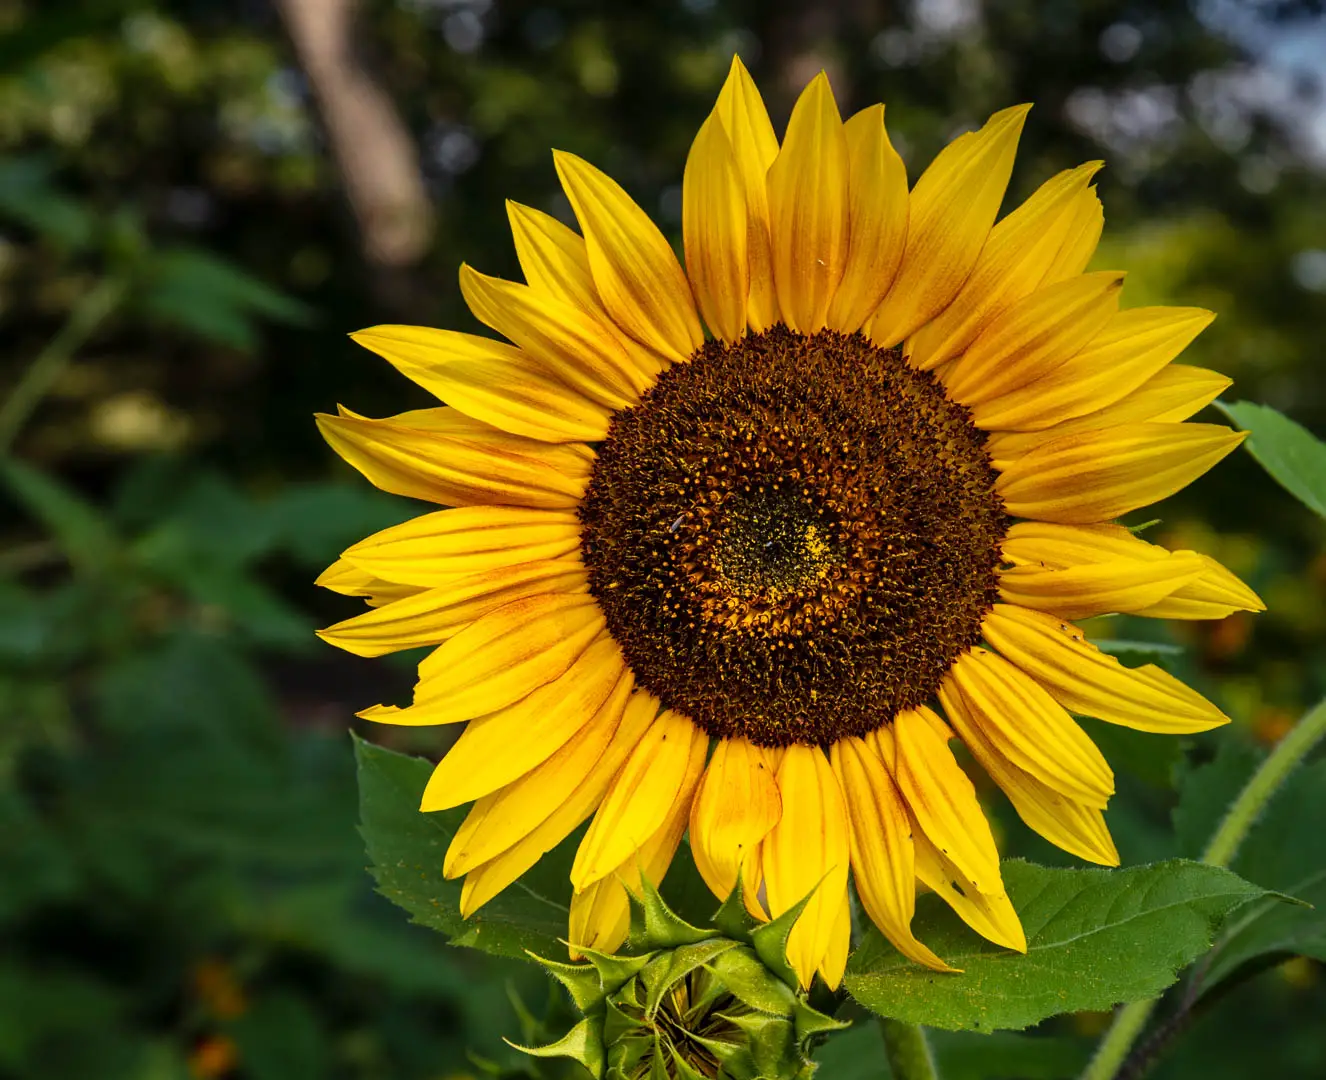 50 Sunflower Quotes About Happiness, Love And More